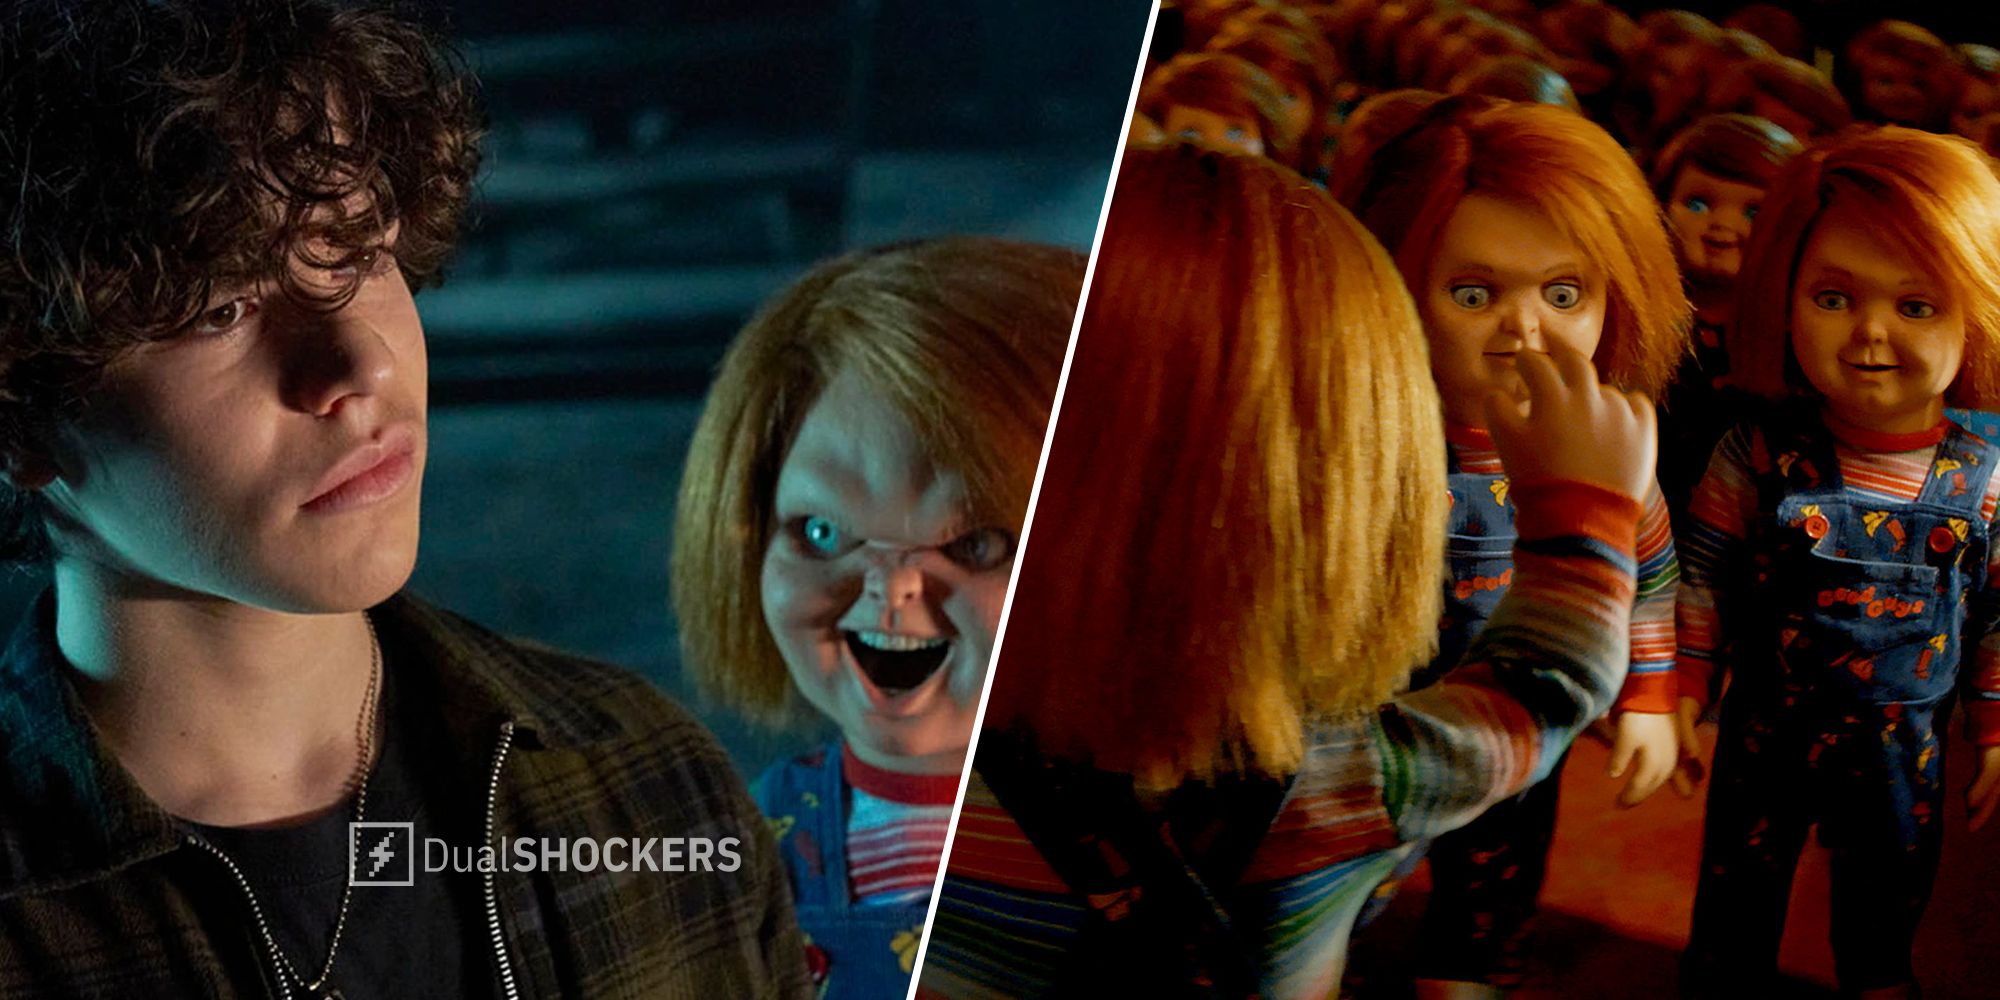 Random Cool] Watch Chucky Invade Other Horror Flicks, Like 'Psycho'! -  Bloody Disgusting